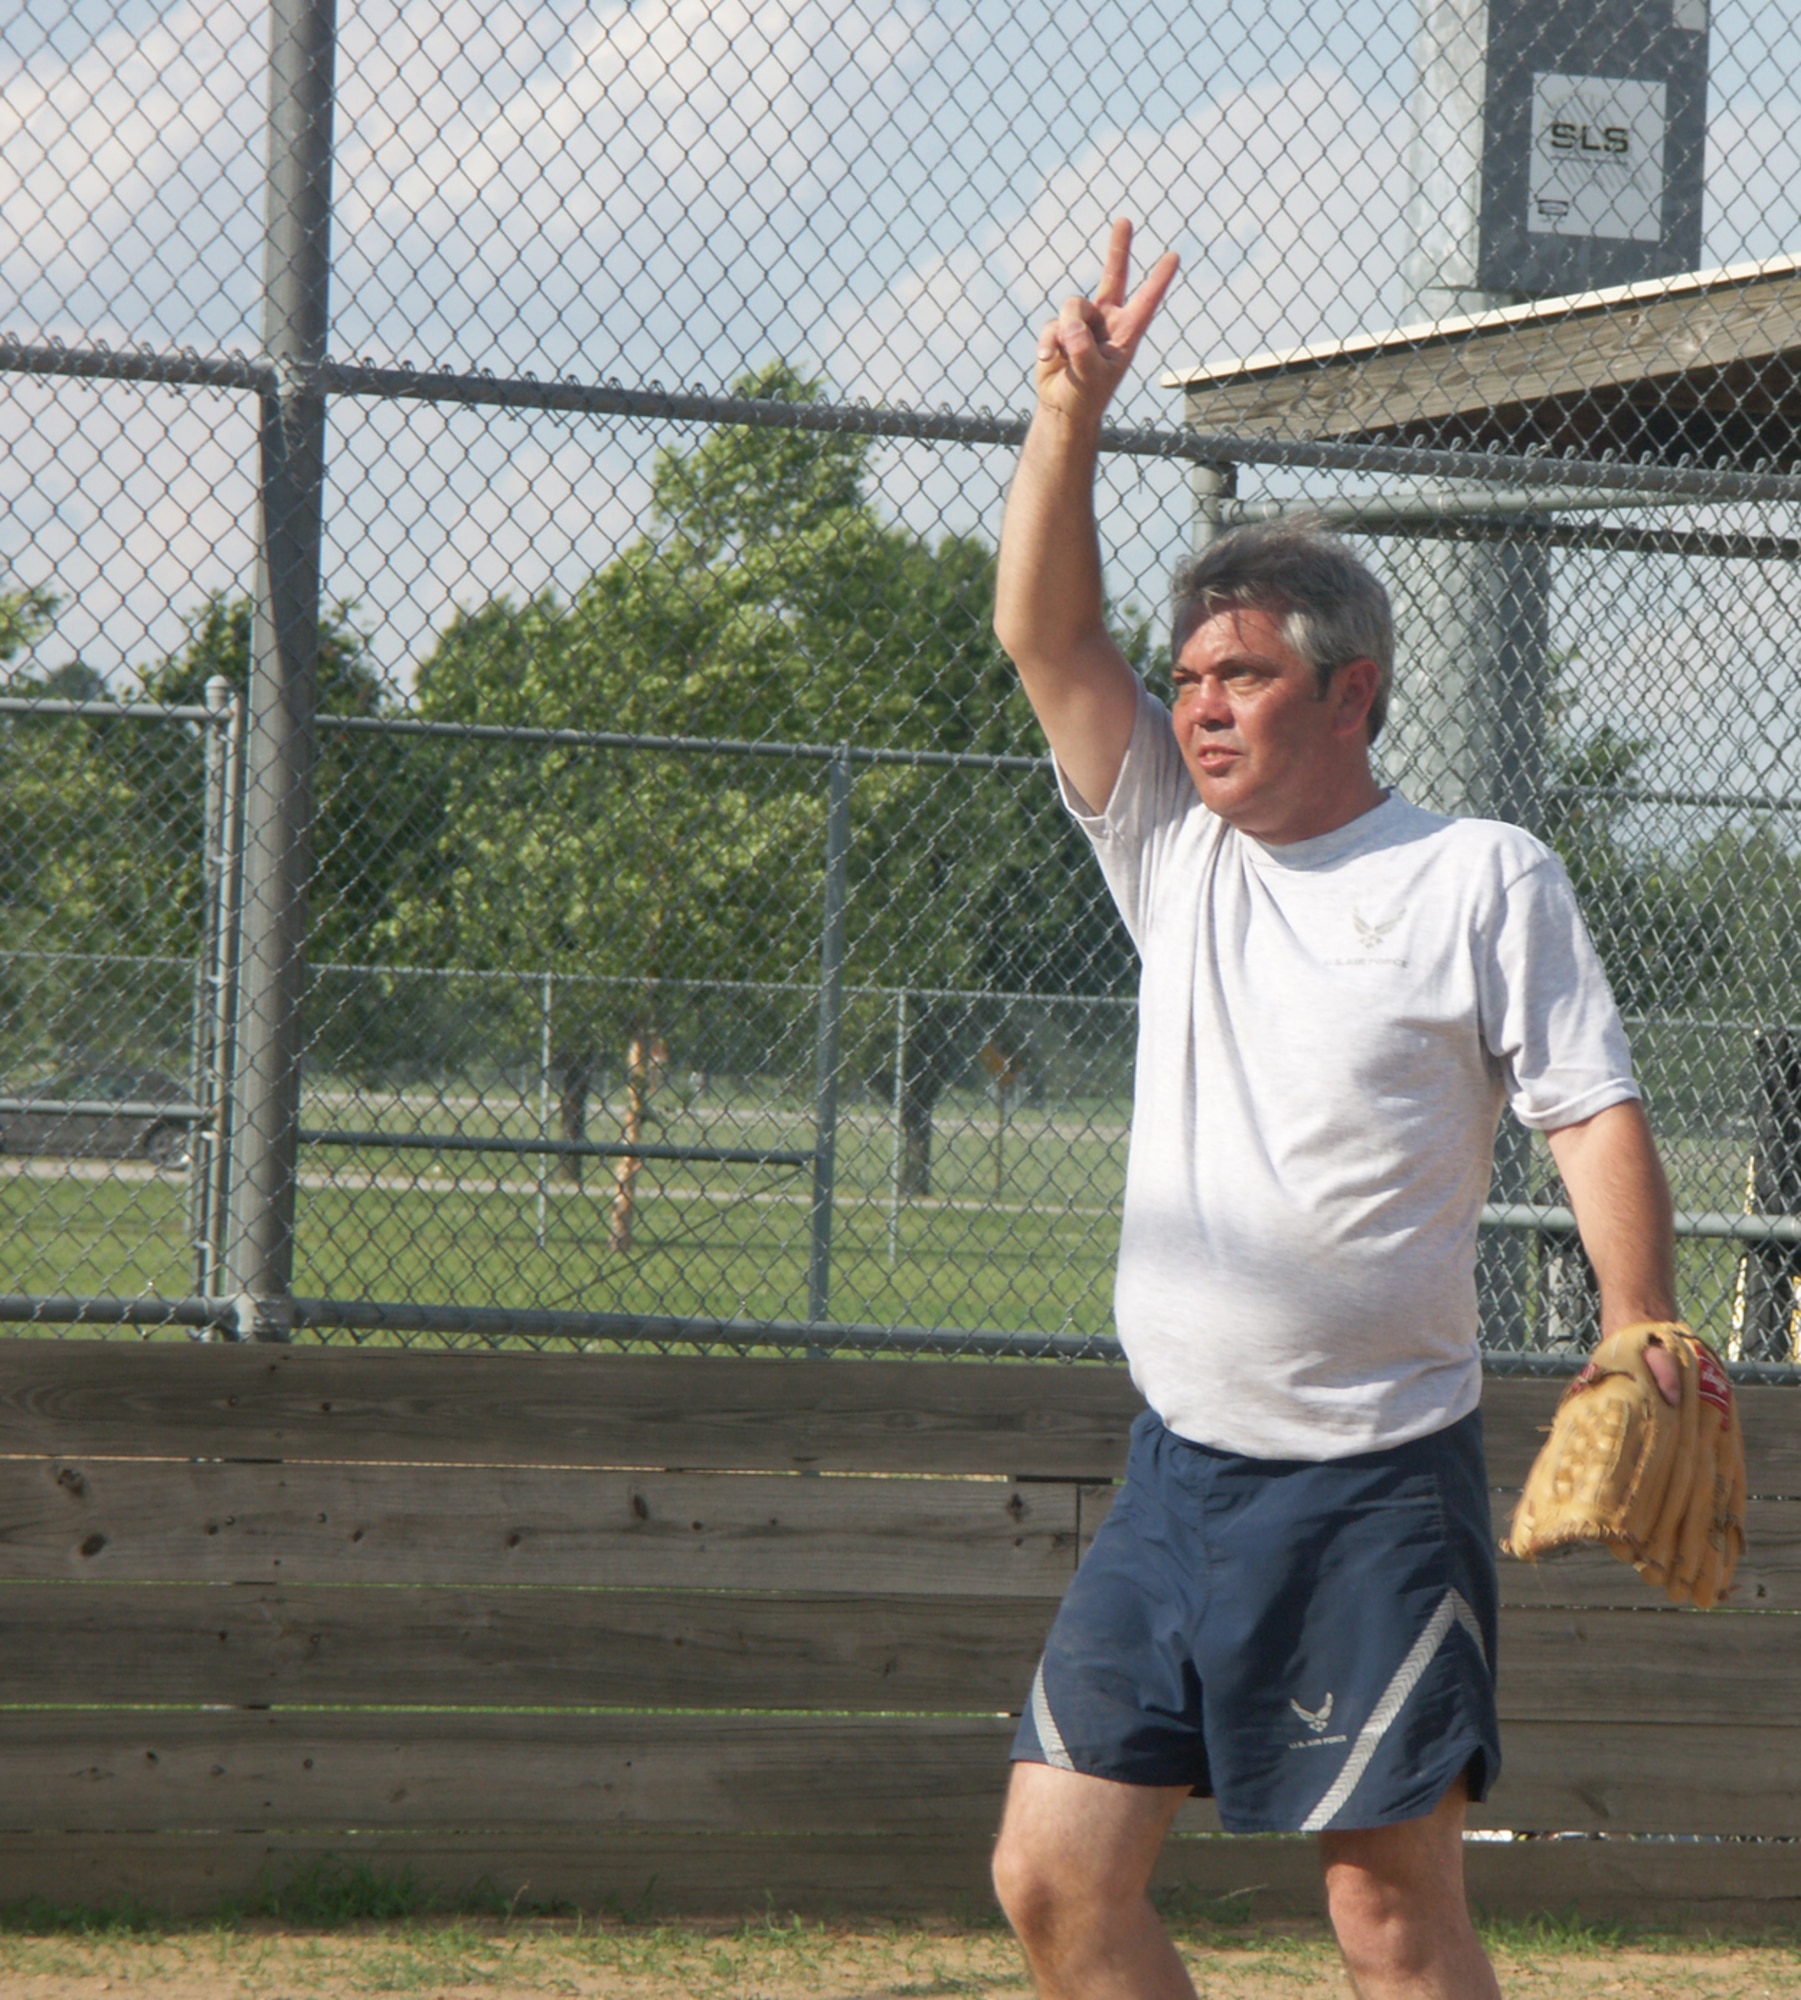 Enlisted are strong in softball as shown by the secret signals sent out by Senior Master Sgt. Ron Peterson at the wing summer picnic.  This is a competitive sport at the 932nd Airlift Wing!  Photo/ Tech Sgt. Dan Oliver